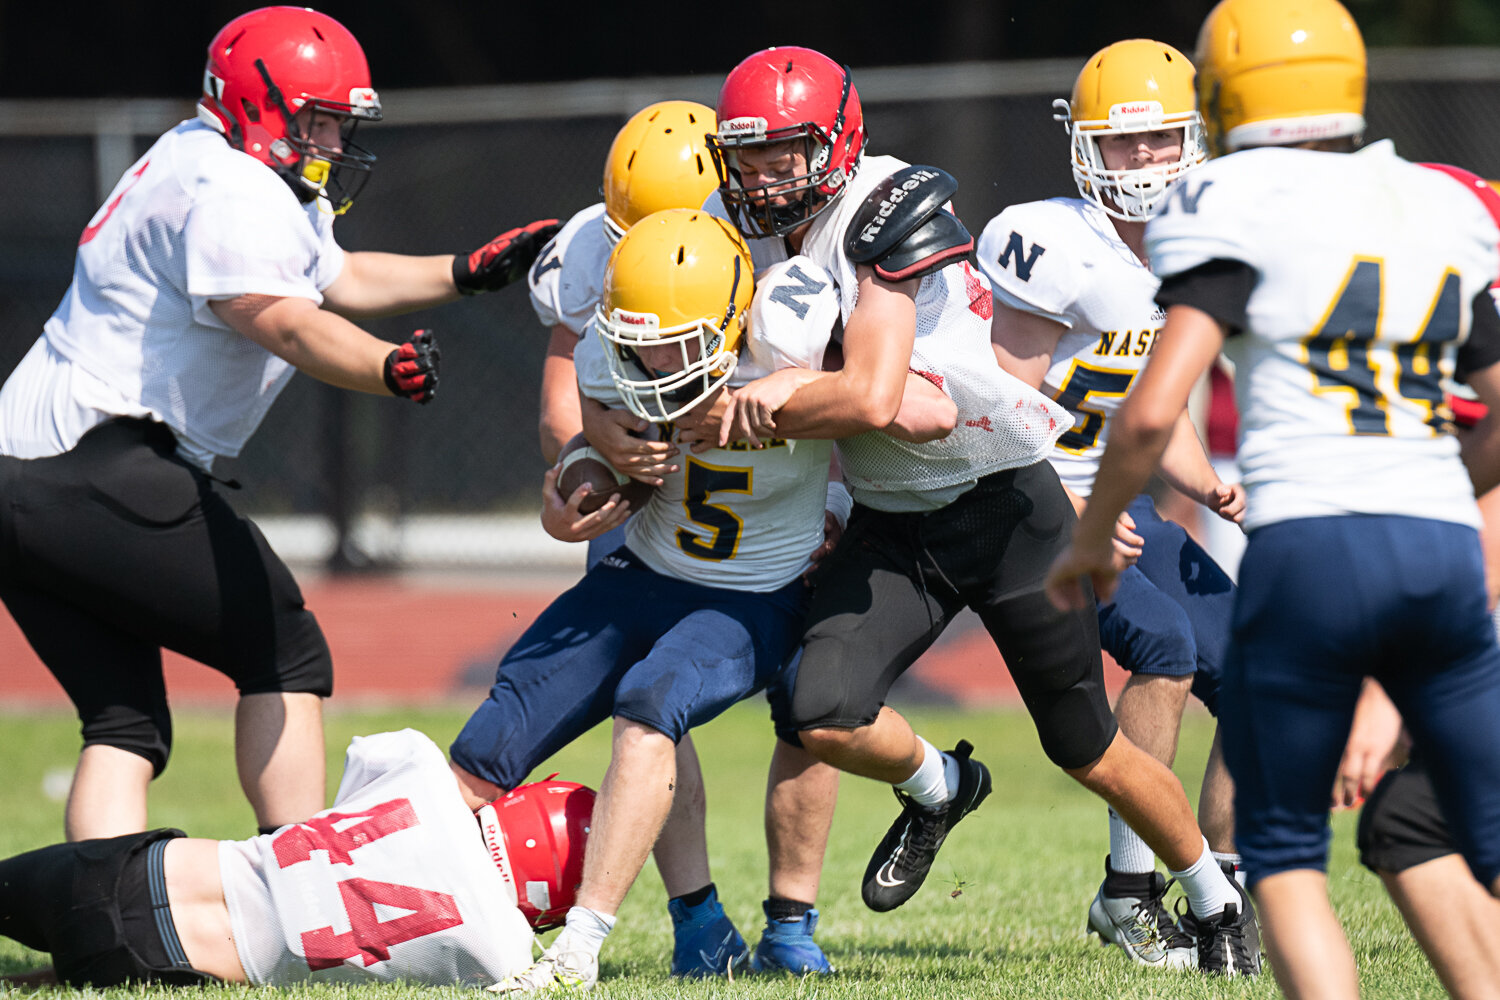 Mossyrock's Hunter Isom wraps up a Naselle ballcarrier at Winlock's jamboree on Aug. 26.